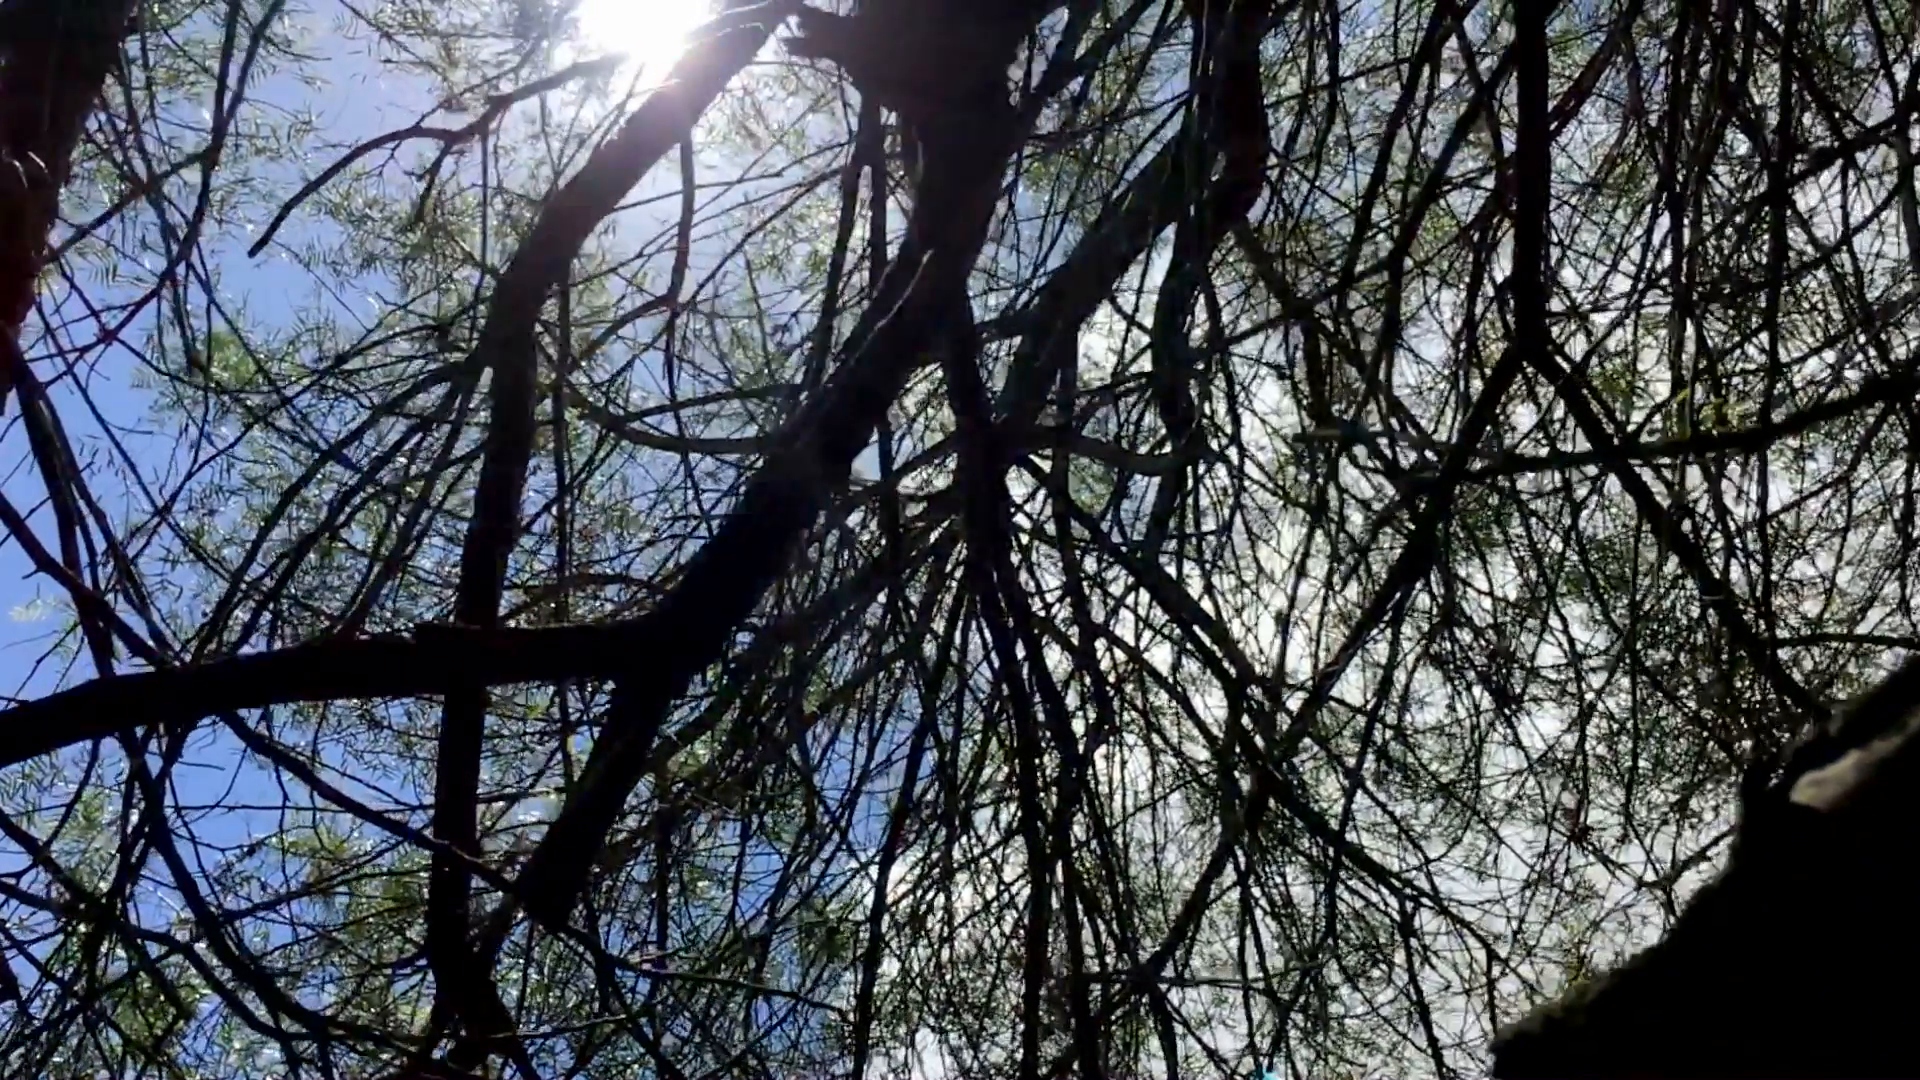 Cinematic steadycam gimbal shot of branches and trees with sunlight ...